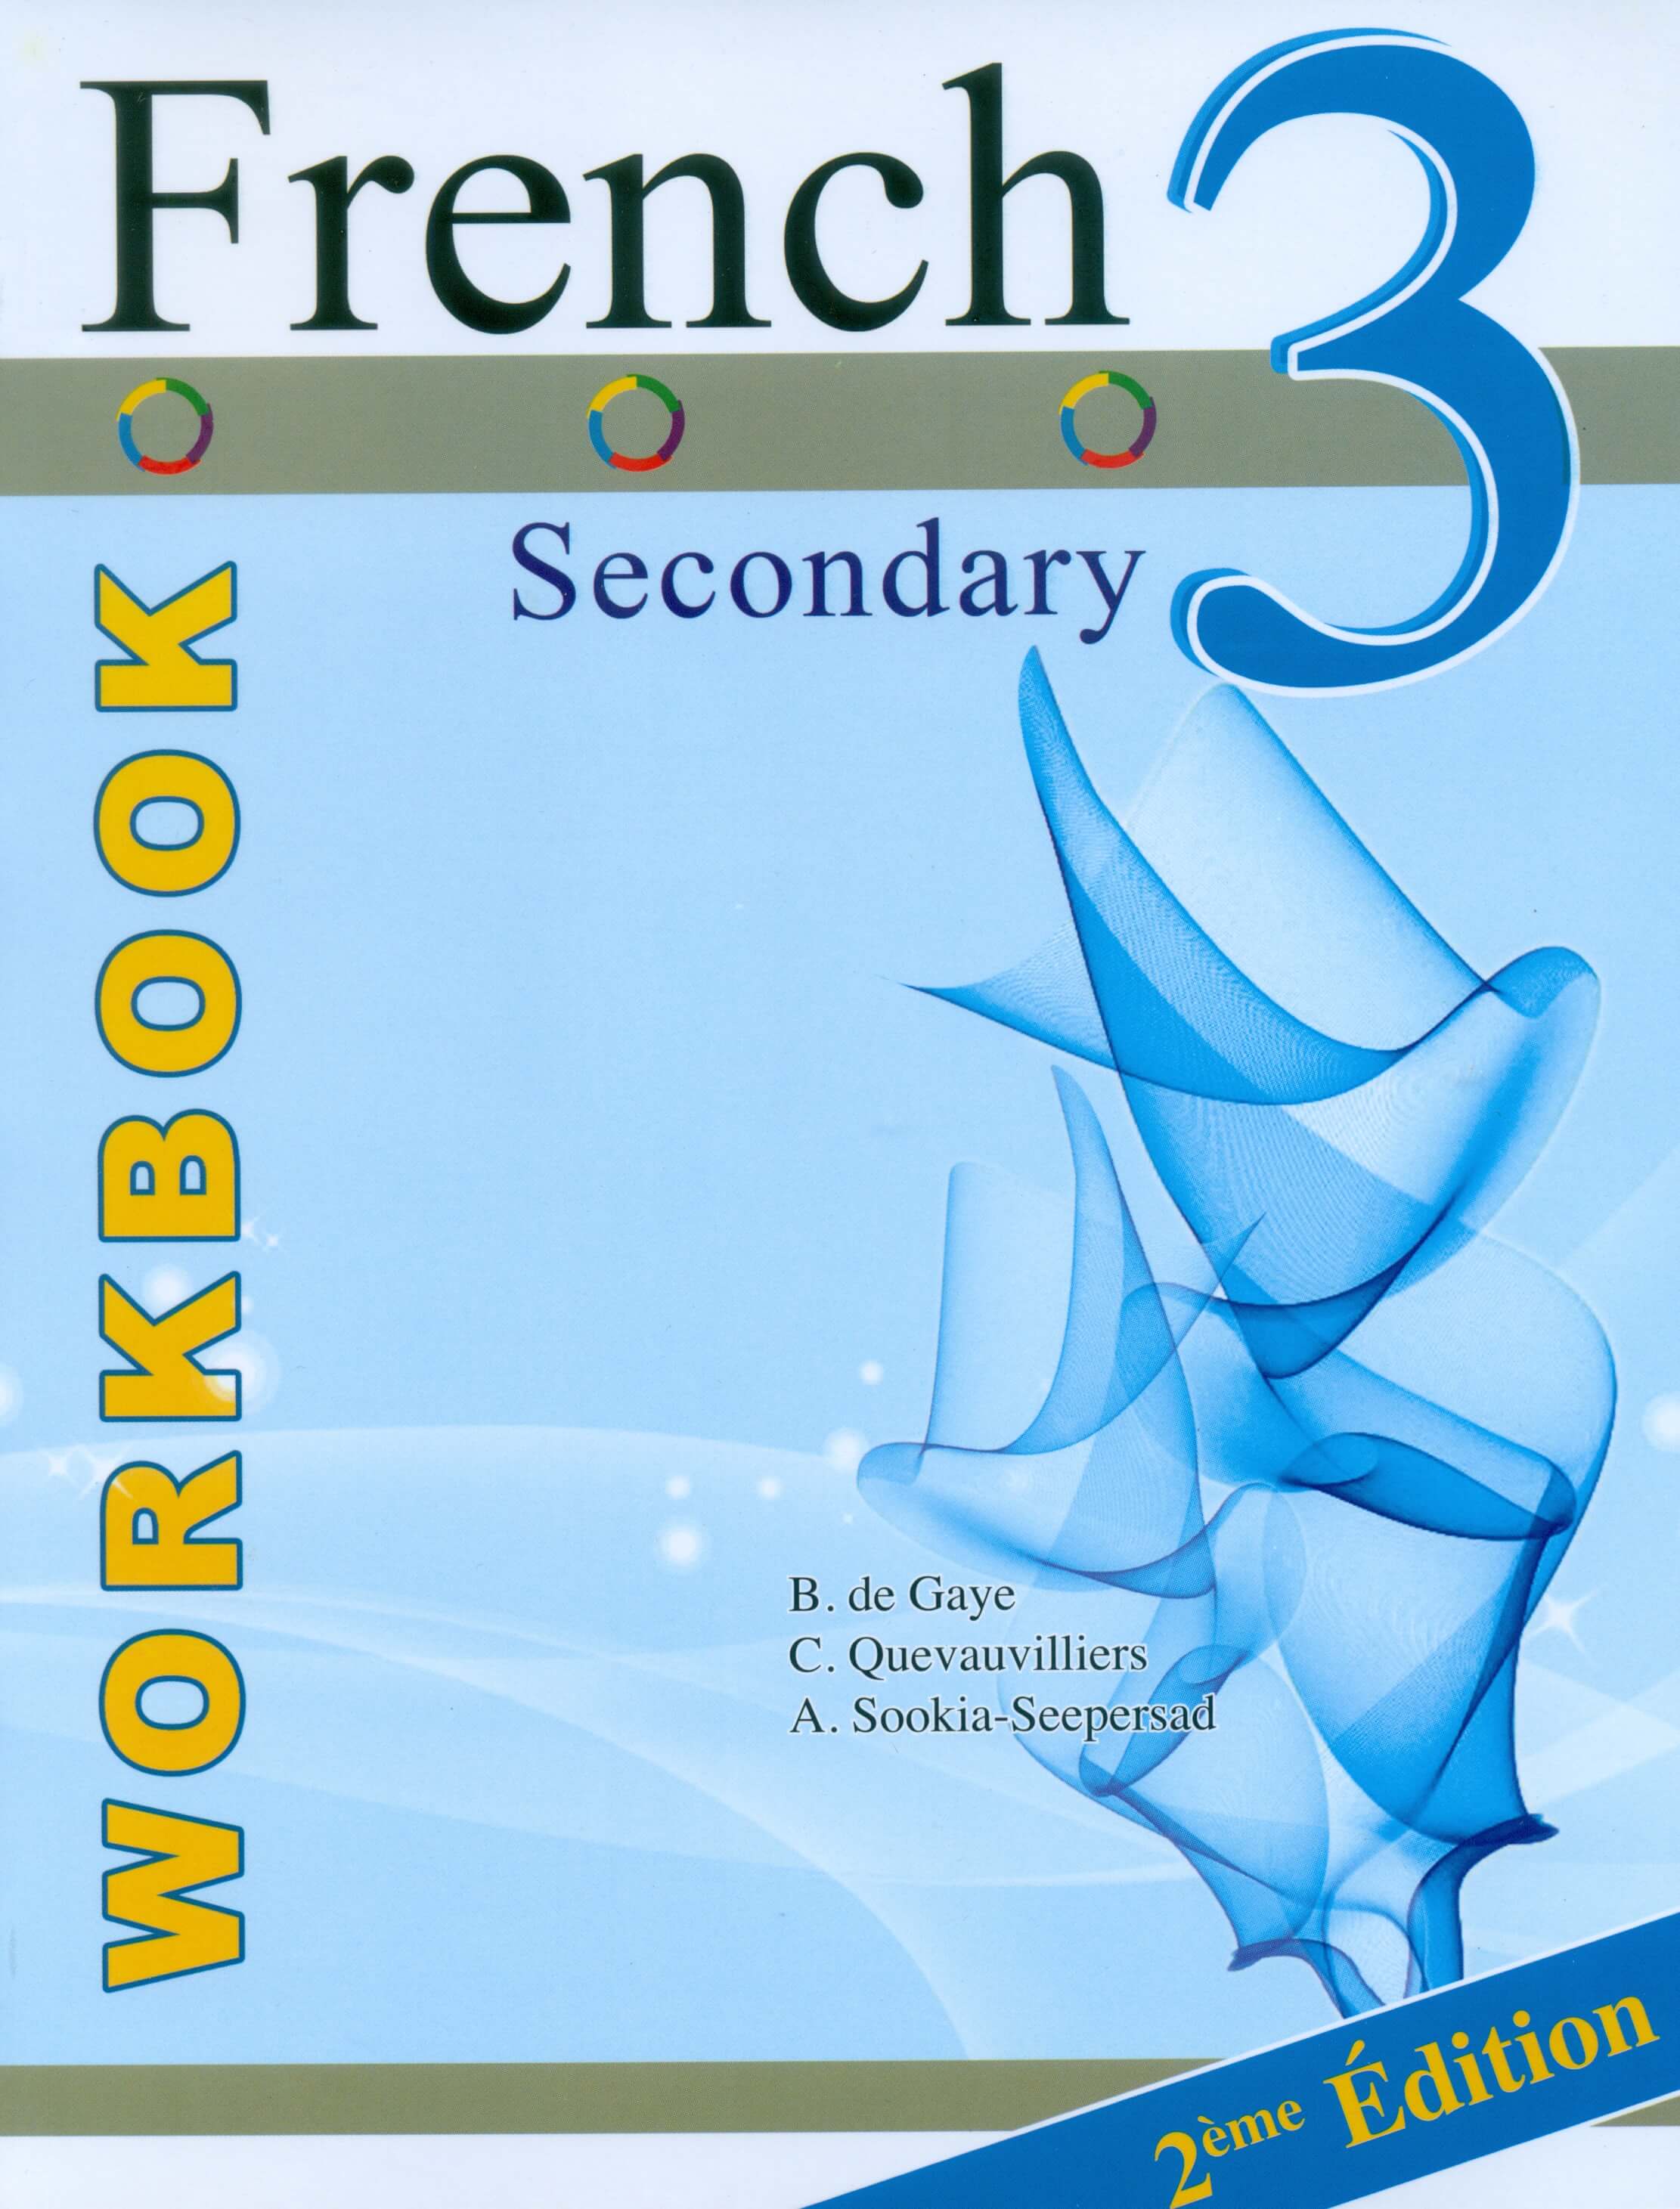 ELP-French Workbook Secondary Book 3 2nd Edition -De Gaye